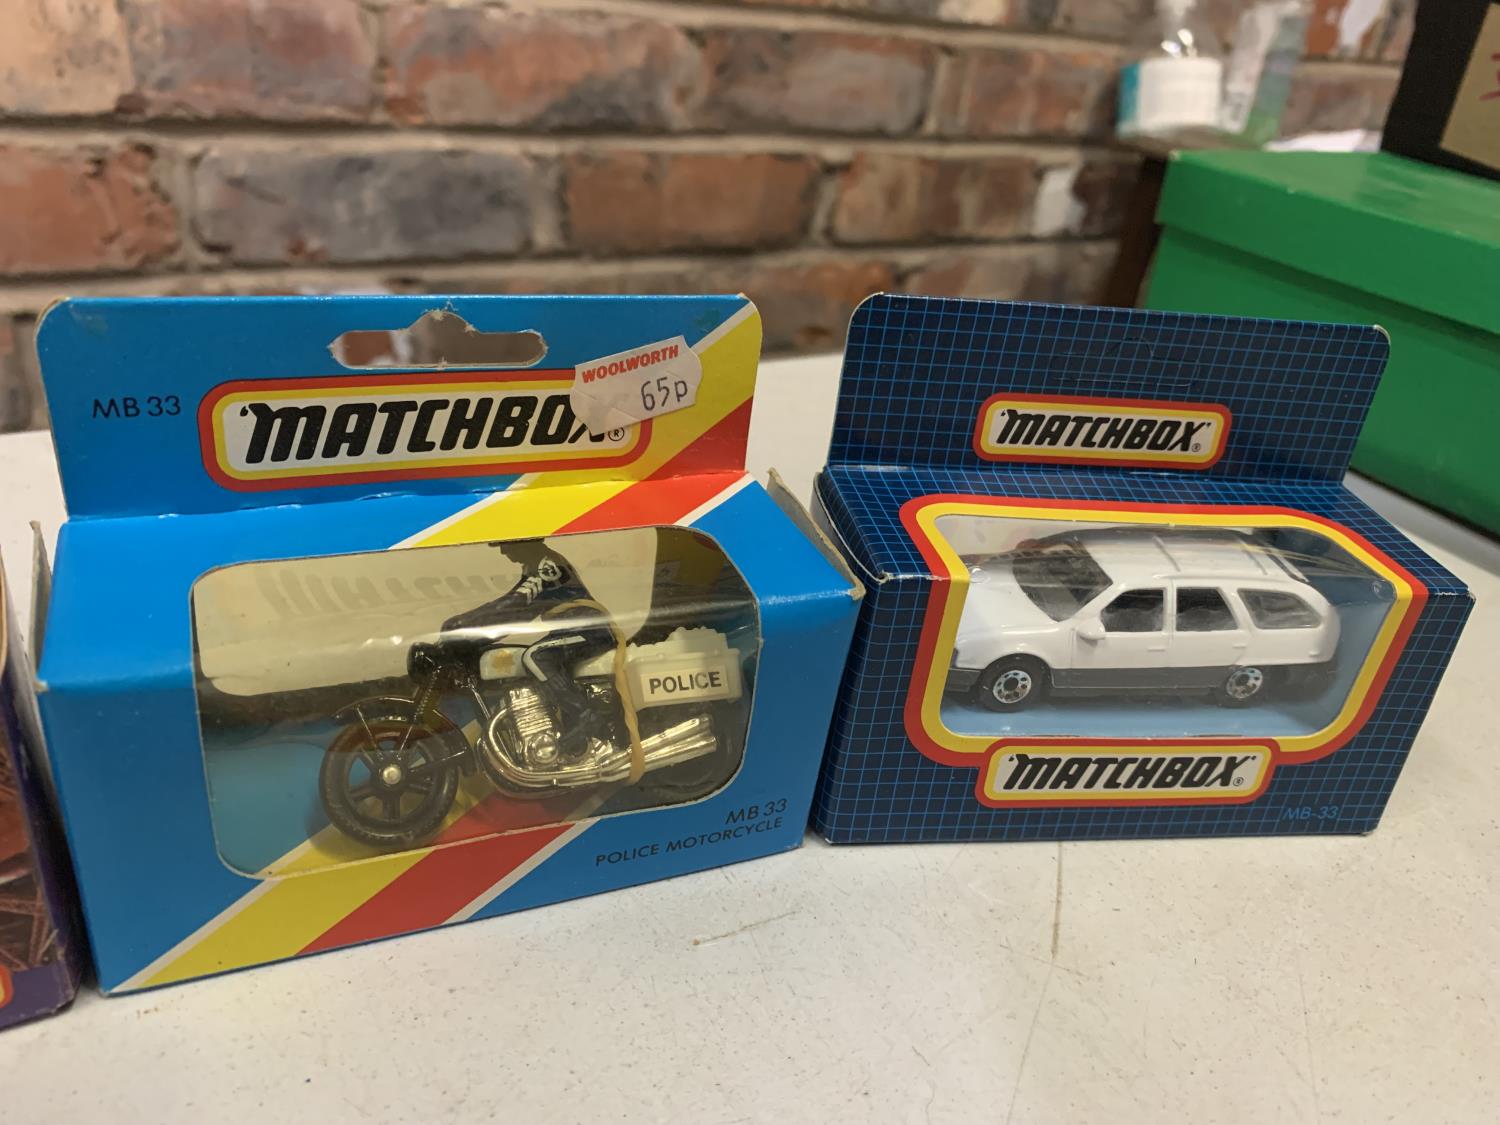 A COLLECTION OF BOXED AND UNBOXED MATCHBOX VEHICLES - ALL MODEL NUMBER 33 OF VARIOUS ERAS AND - Image 6 of 6